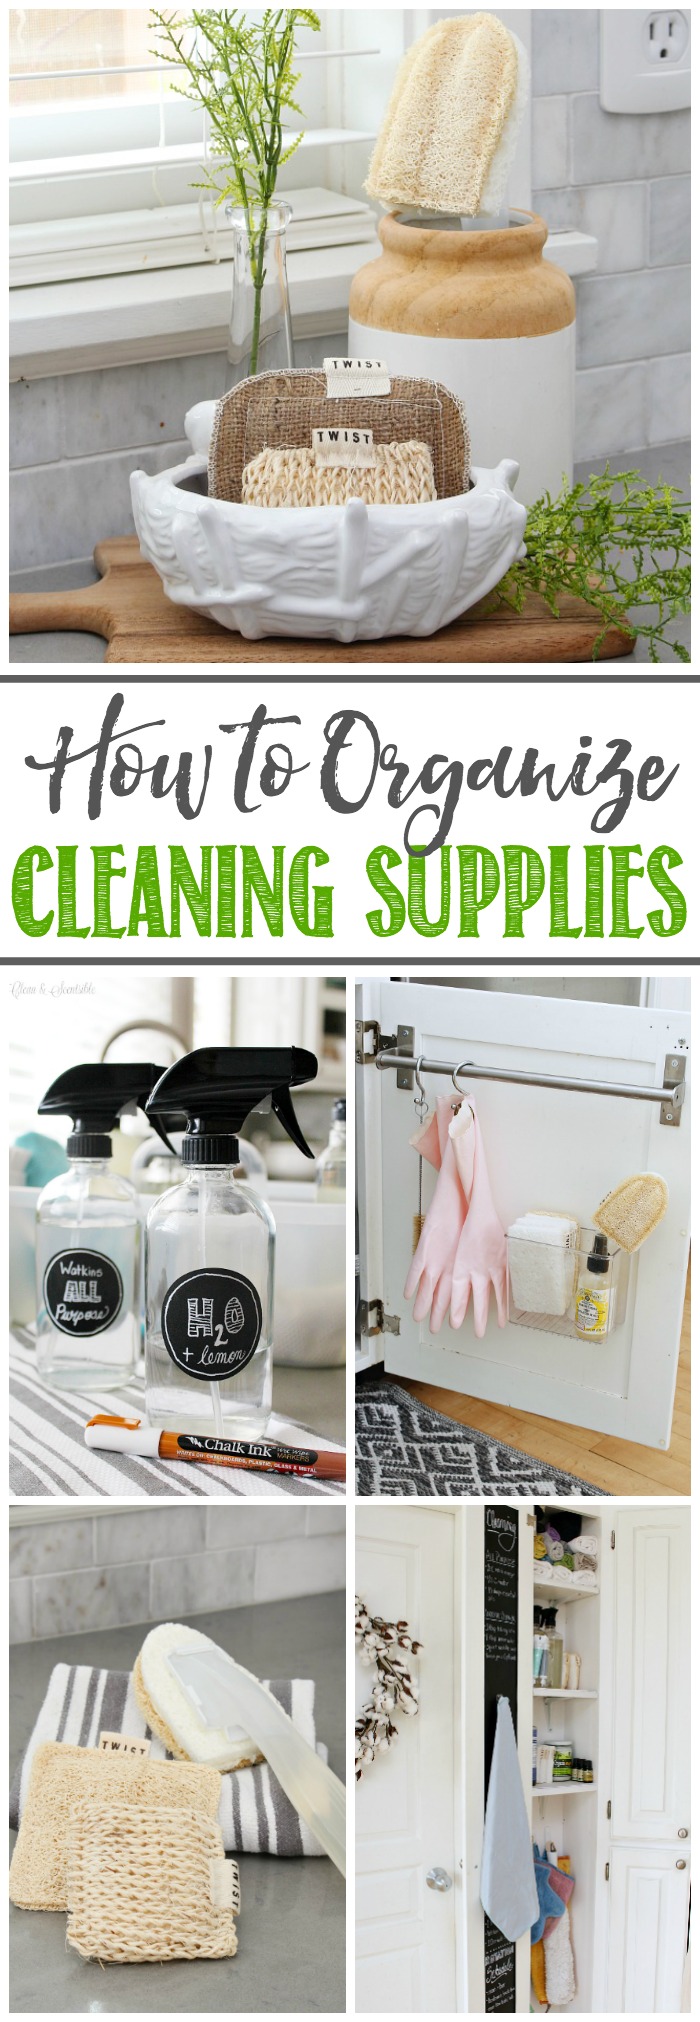 https://www.cleanandscentsible.com/wp-content/uploads/2018/01/How-to-Organize-Cleaning-Supplies.jpg